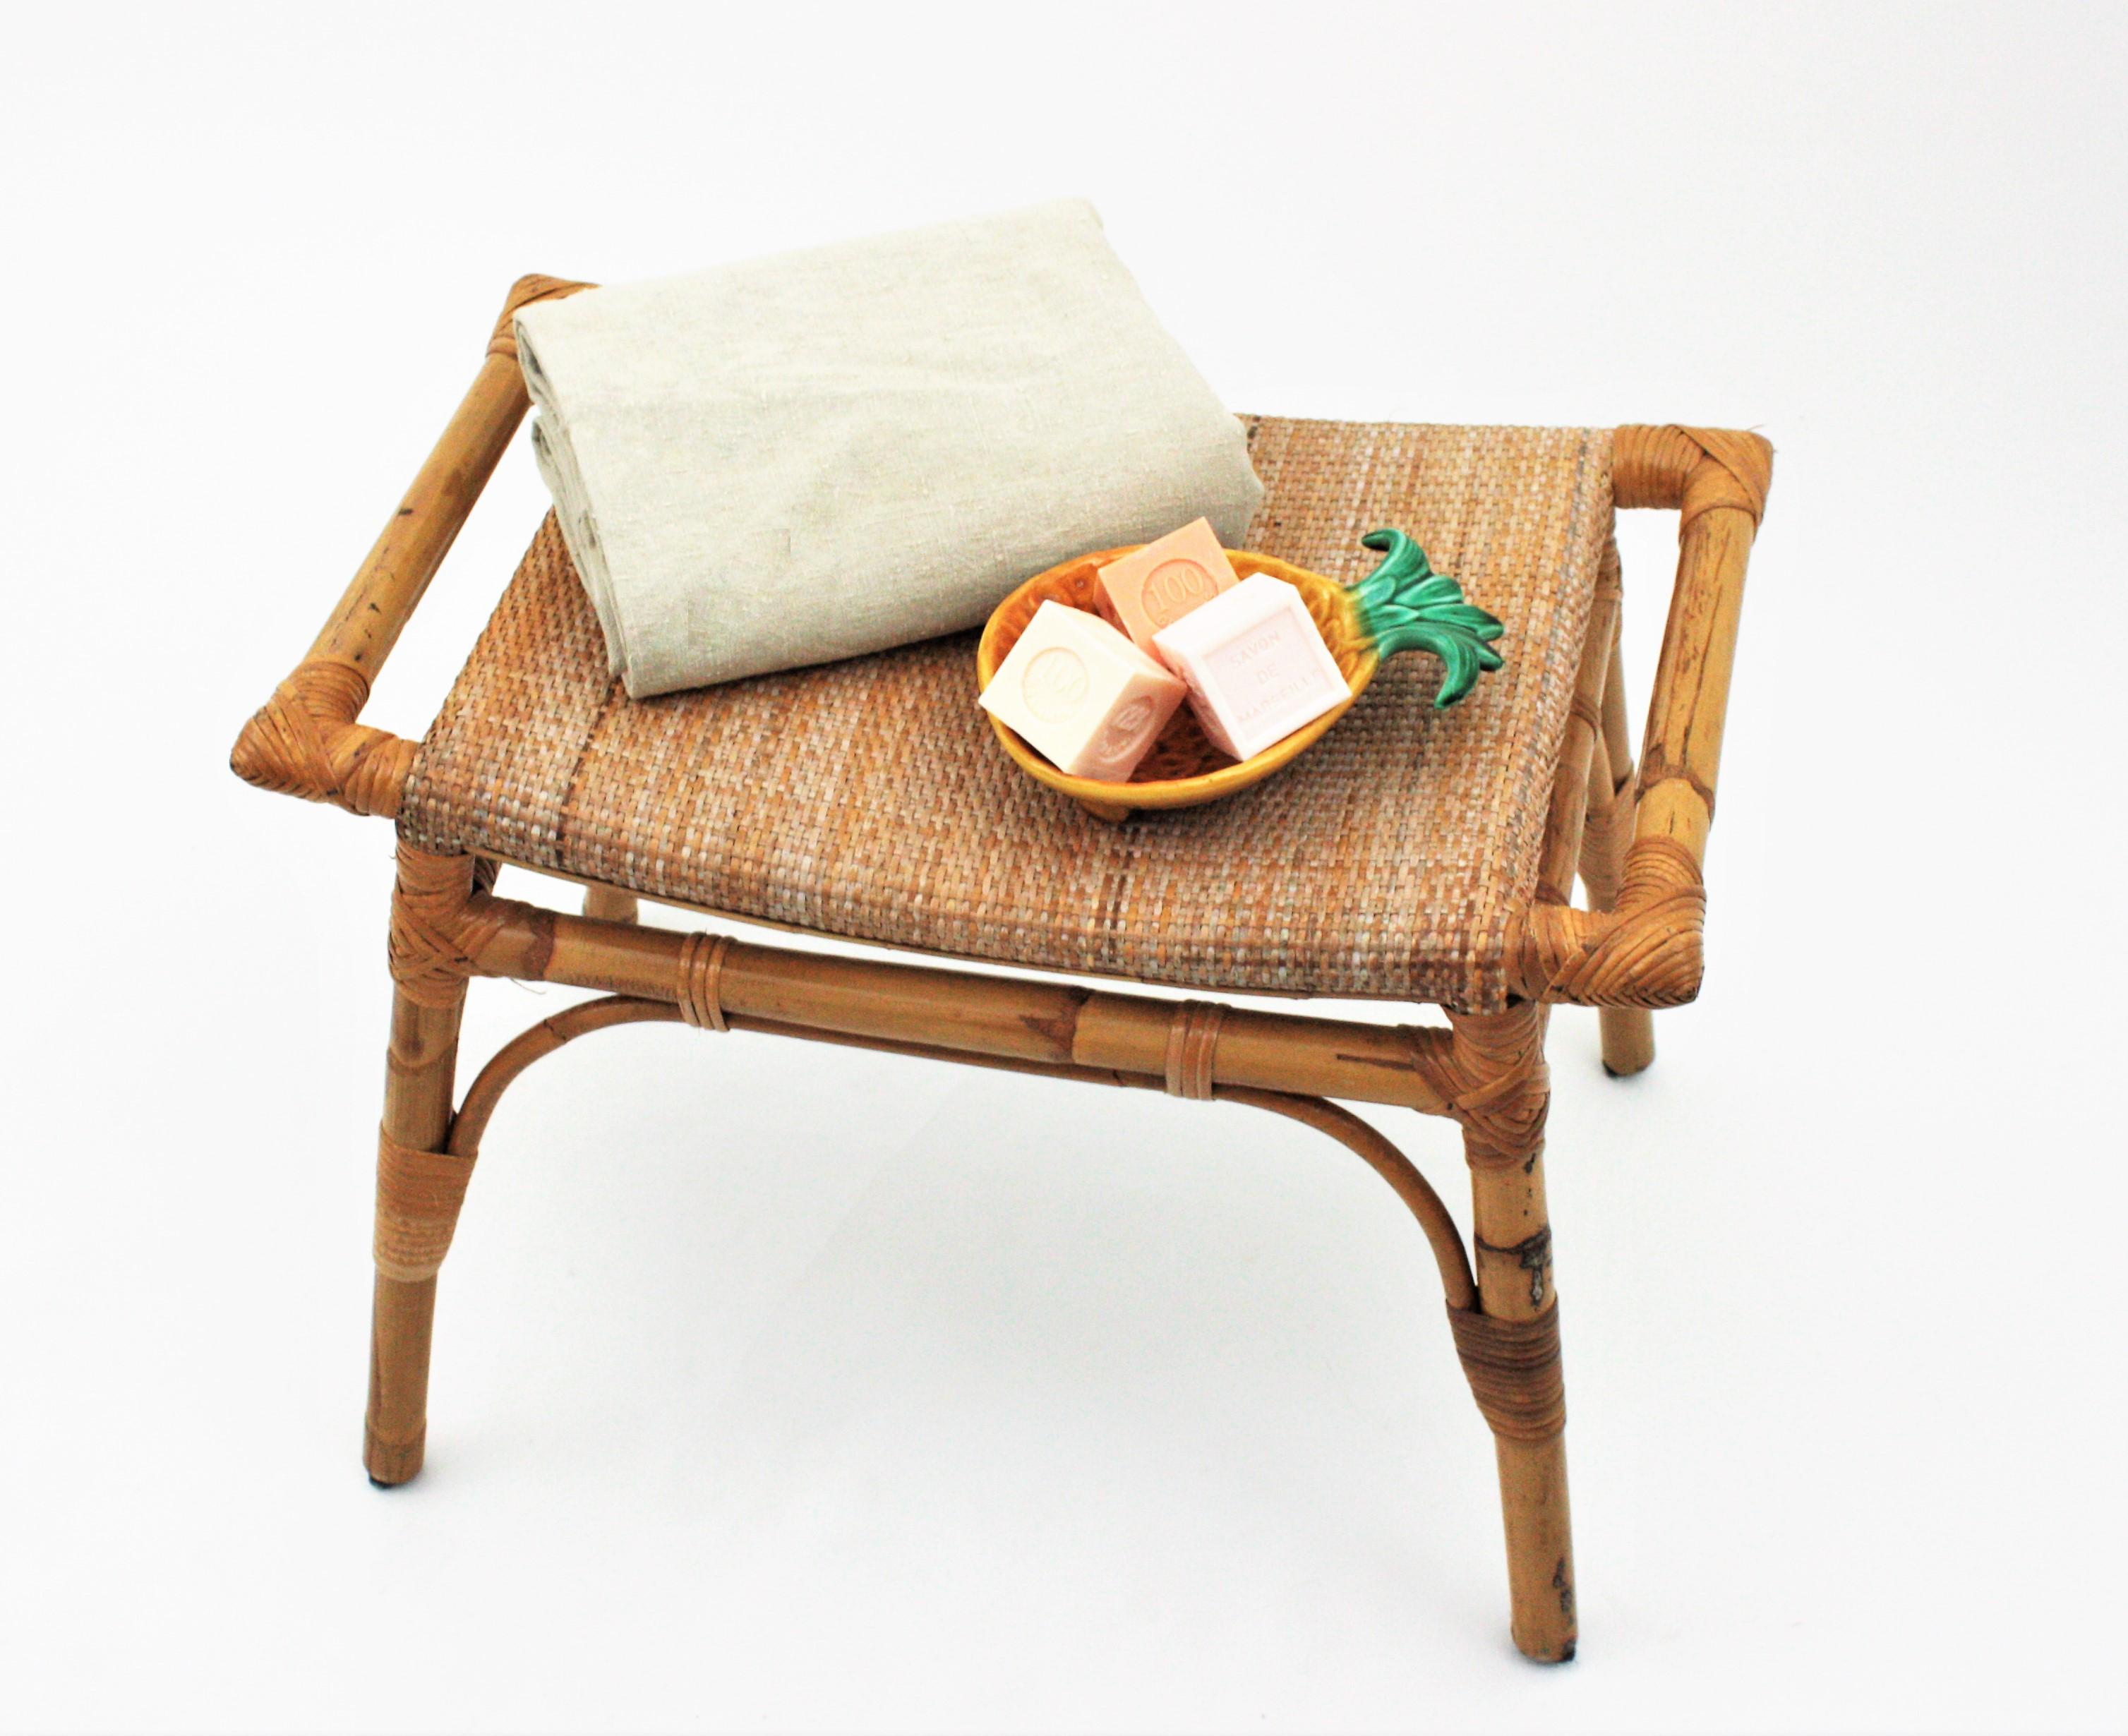 Spanish Bamboo Stool, Ottoman or Bench with Cane Seat